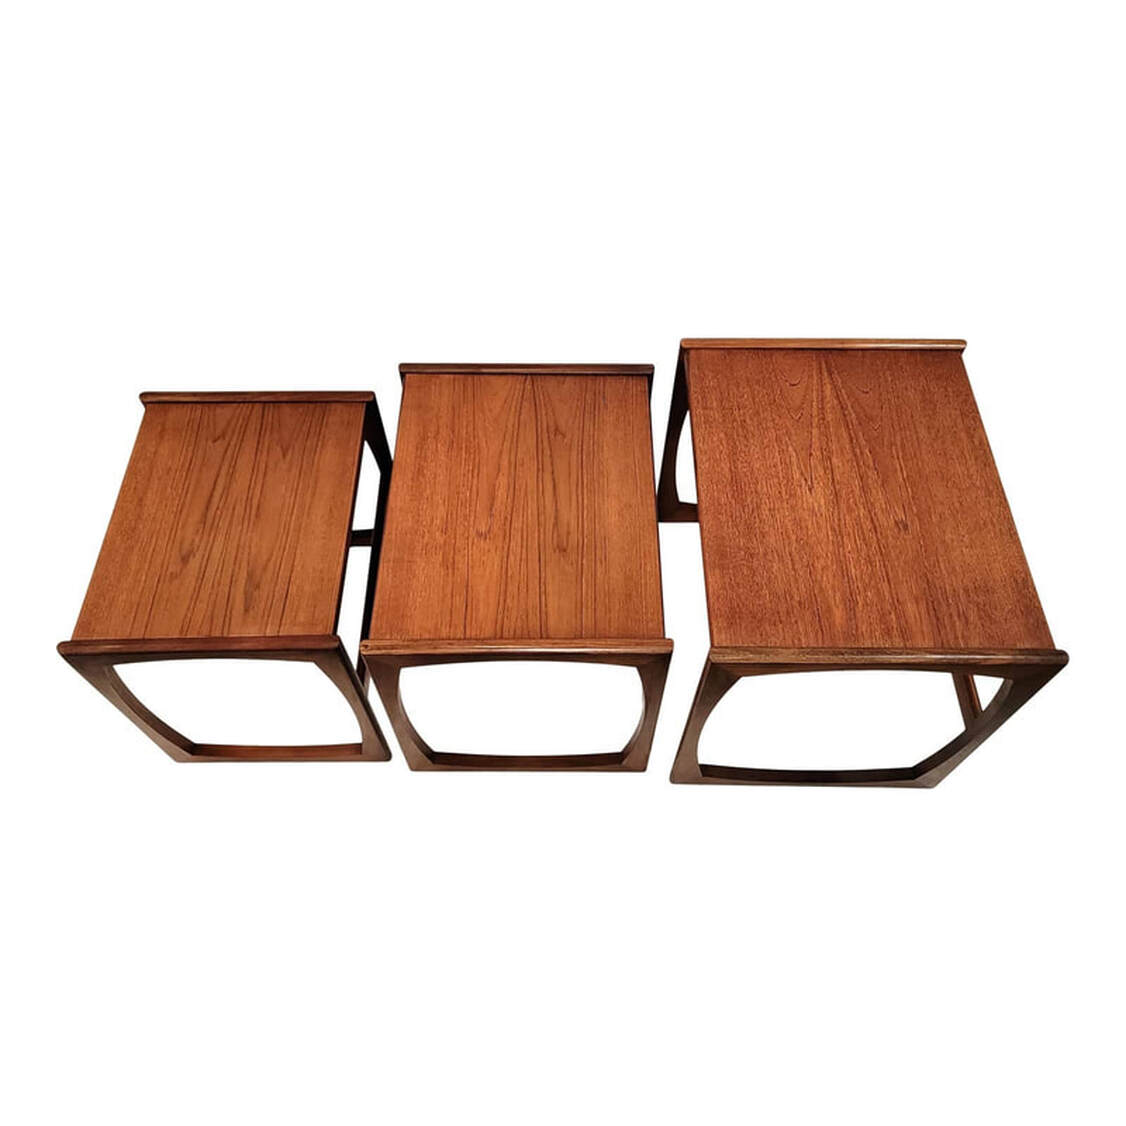  Set of three Mid-Century Modern nested side tables designed by Roger Bennett for G-Plan. Southeast Asian teak wood tops above African afrormosia wood bases. Open square sides, rectangular tops.